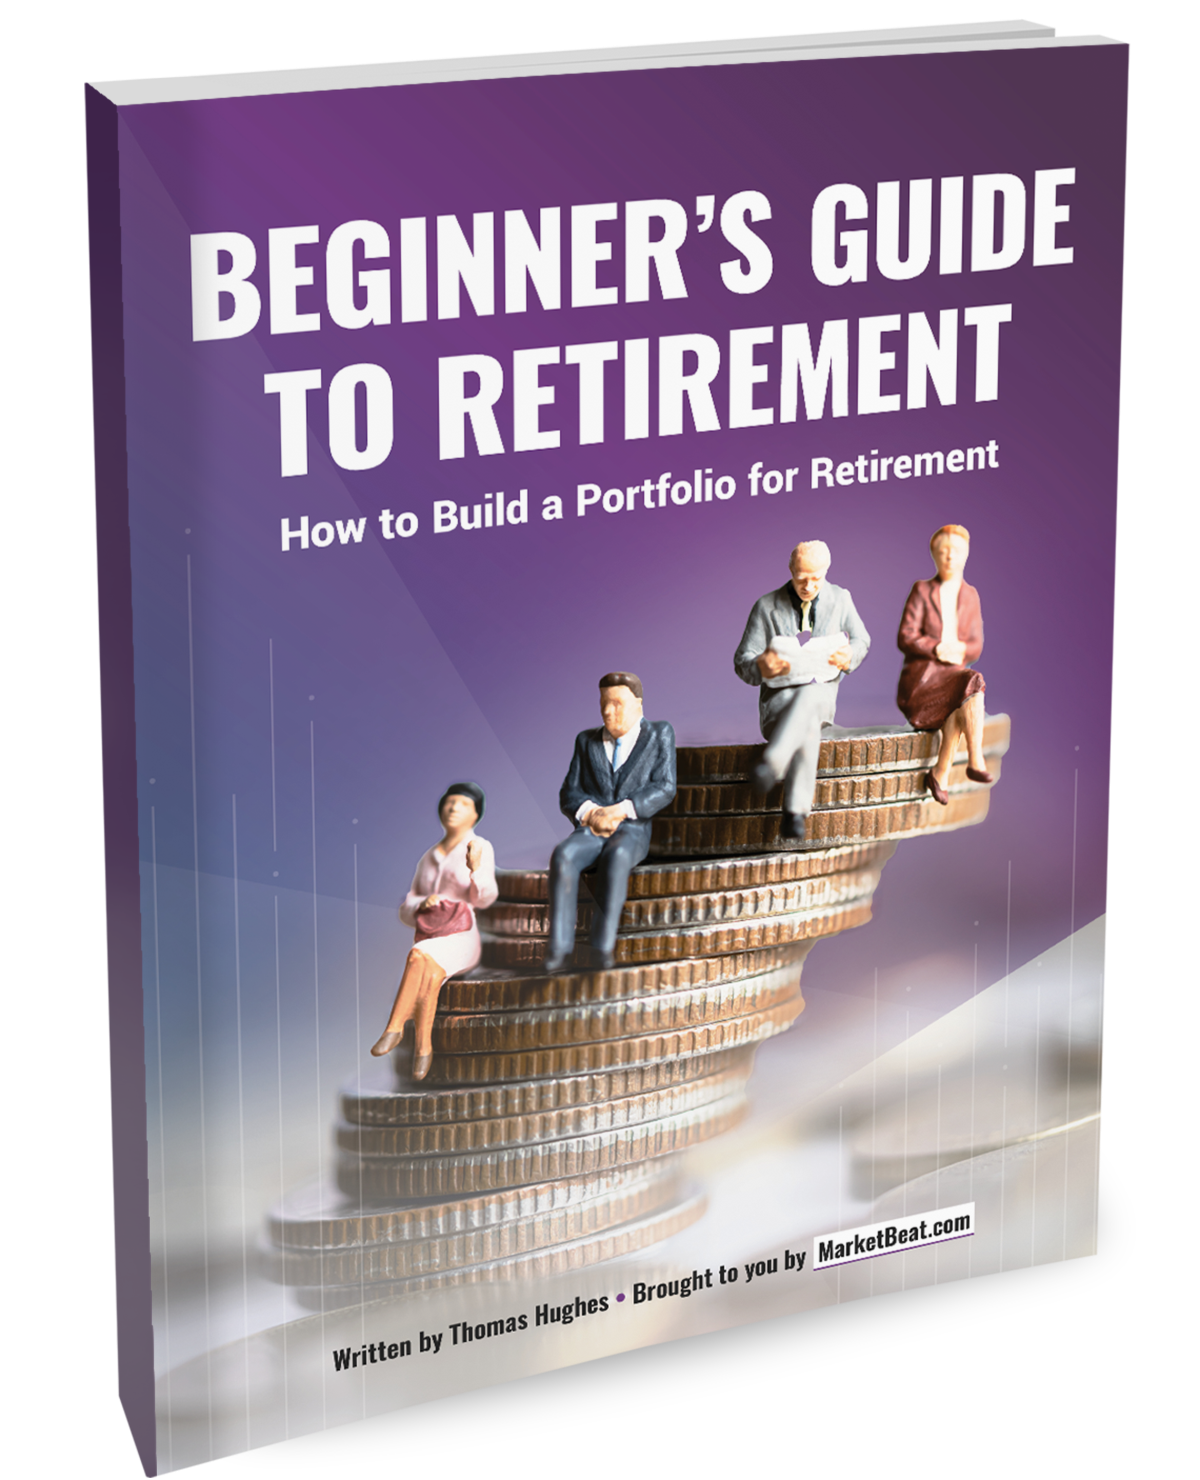 Beginner's guide to pension shares